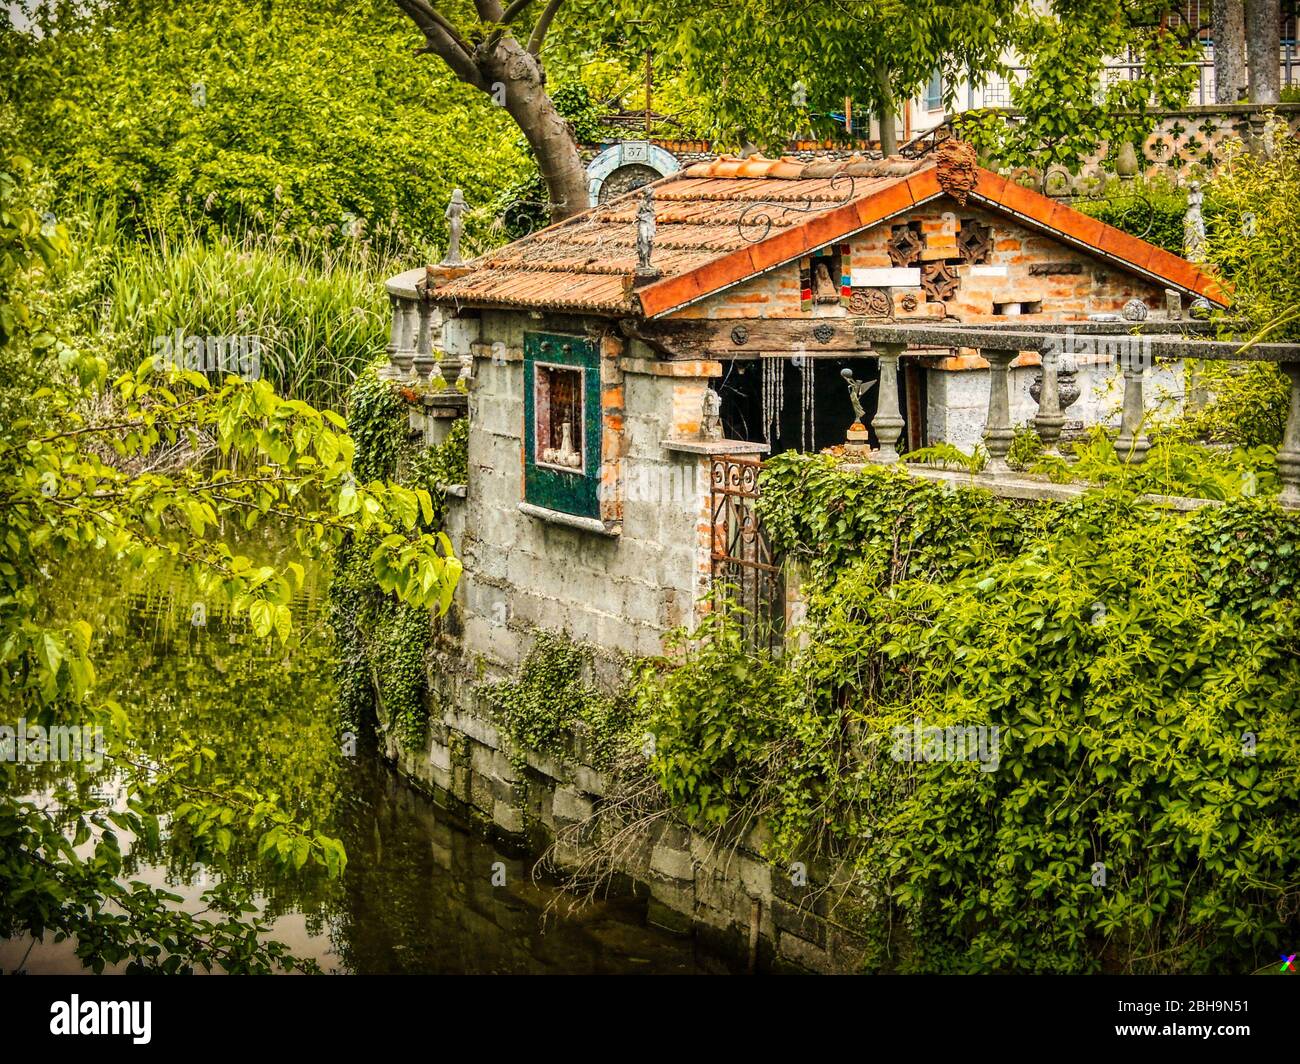 Tiny house on the bank of a stream surrounded by green and luxuriant nature. Statuettes and pottery decorate the exterior. Mantua, Lombardy, Italy. Stock Photo